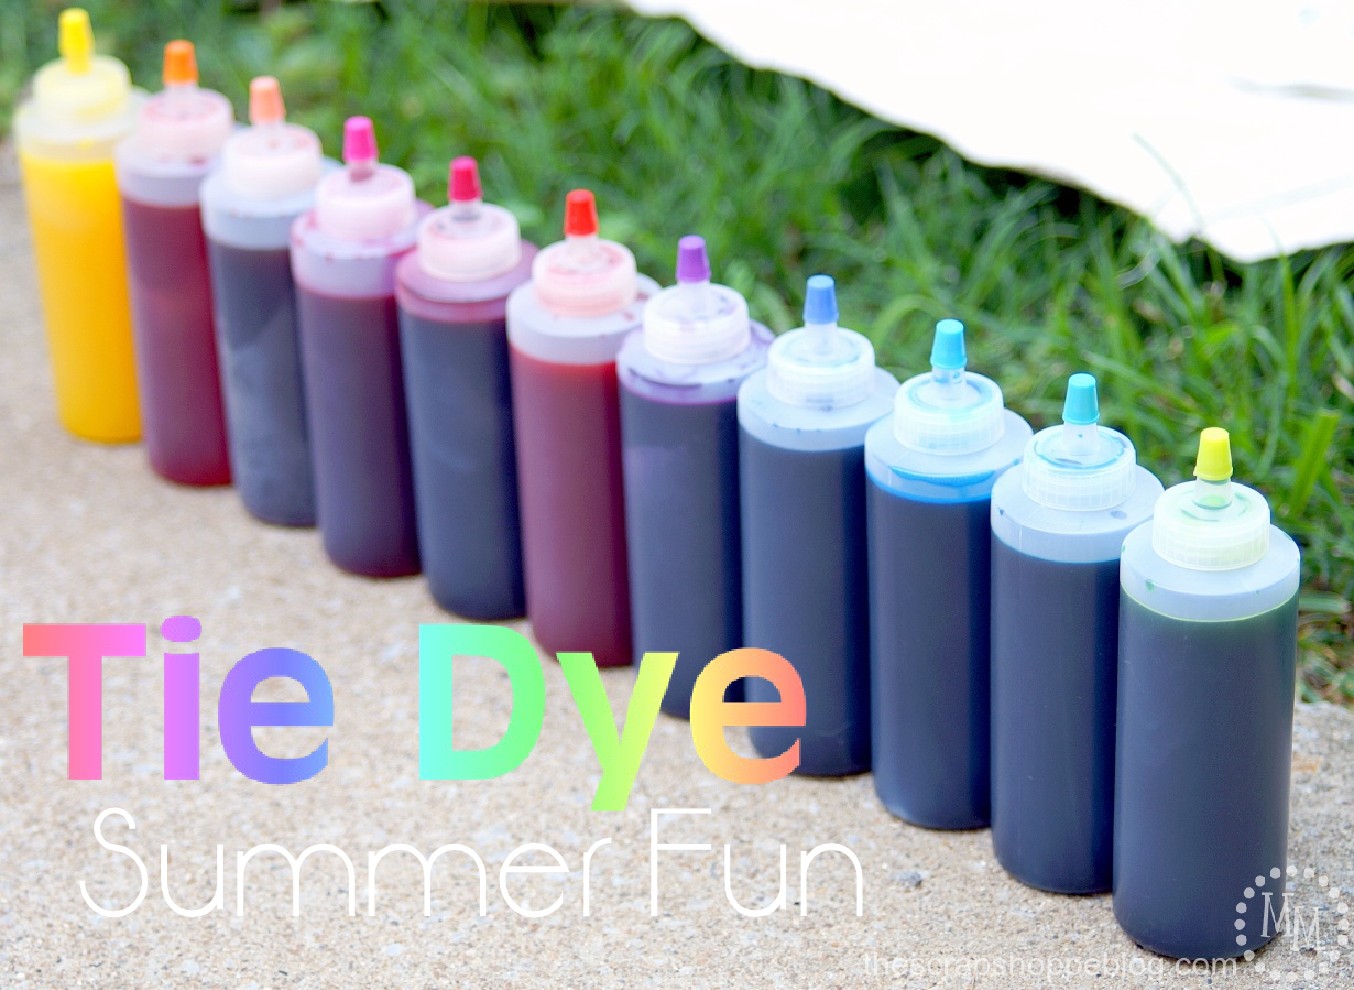 10. Tie-Dye Nails for a Fun Summer Look - wide 7